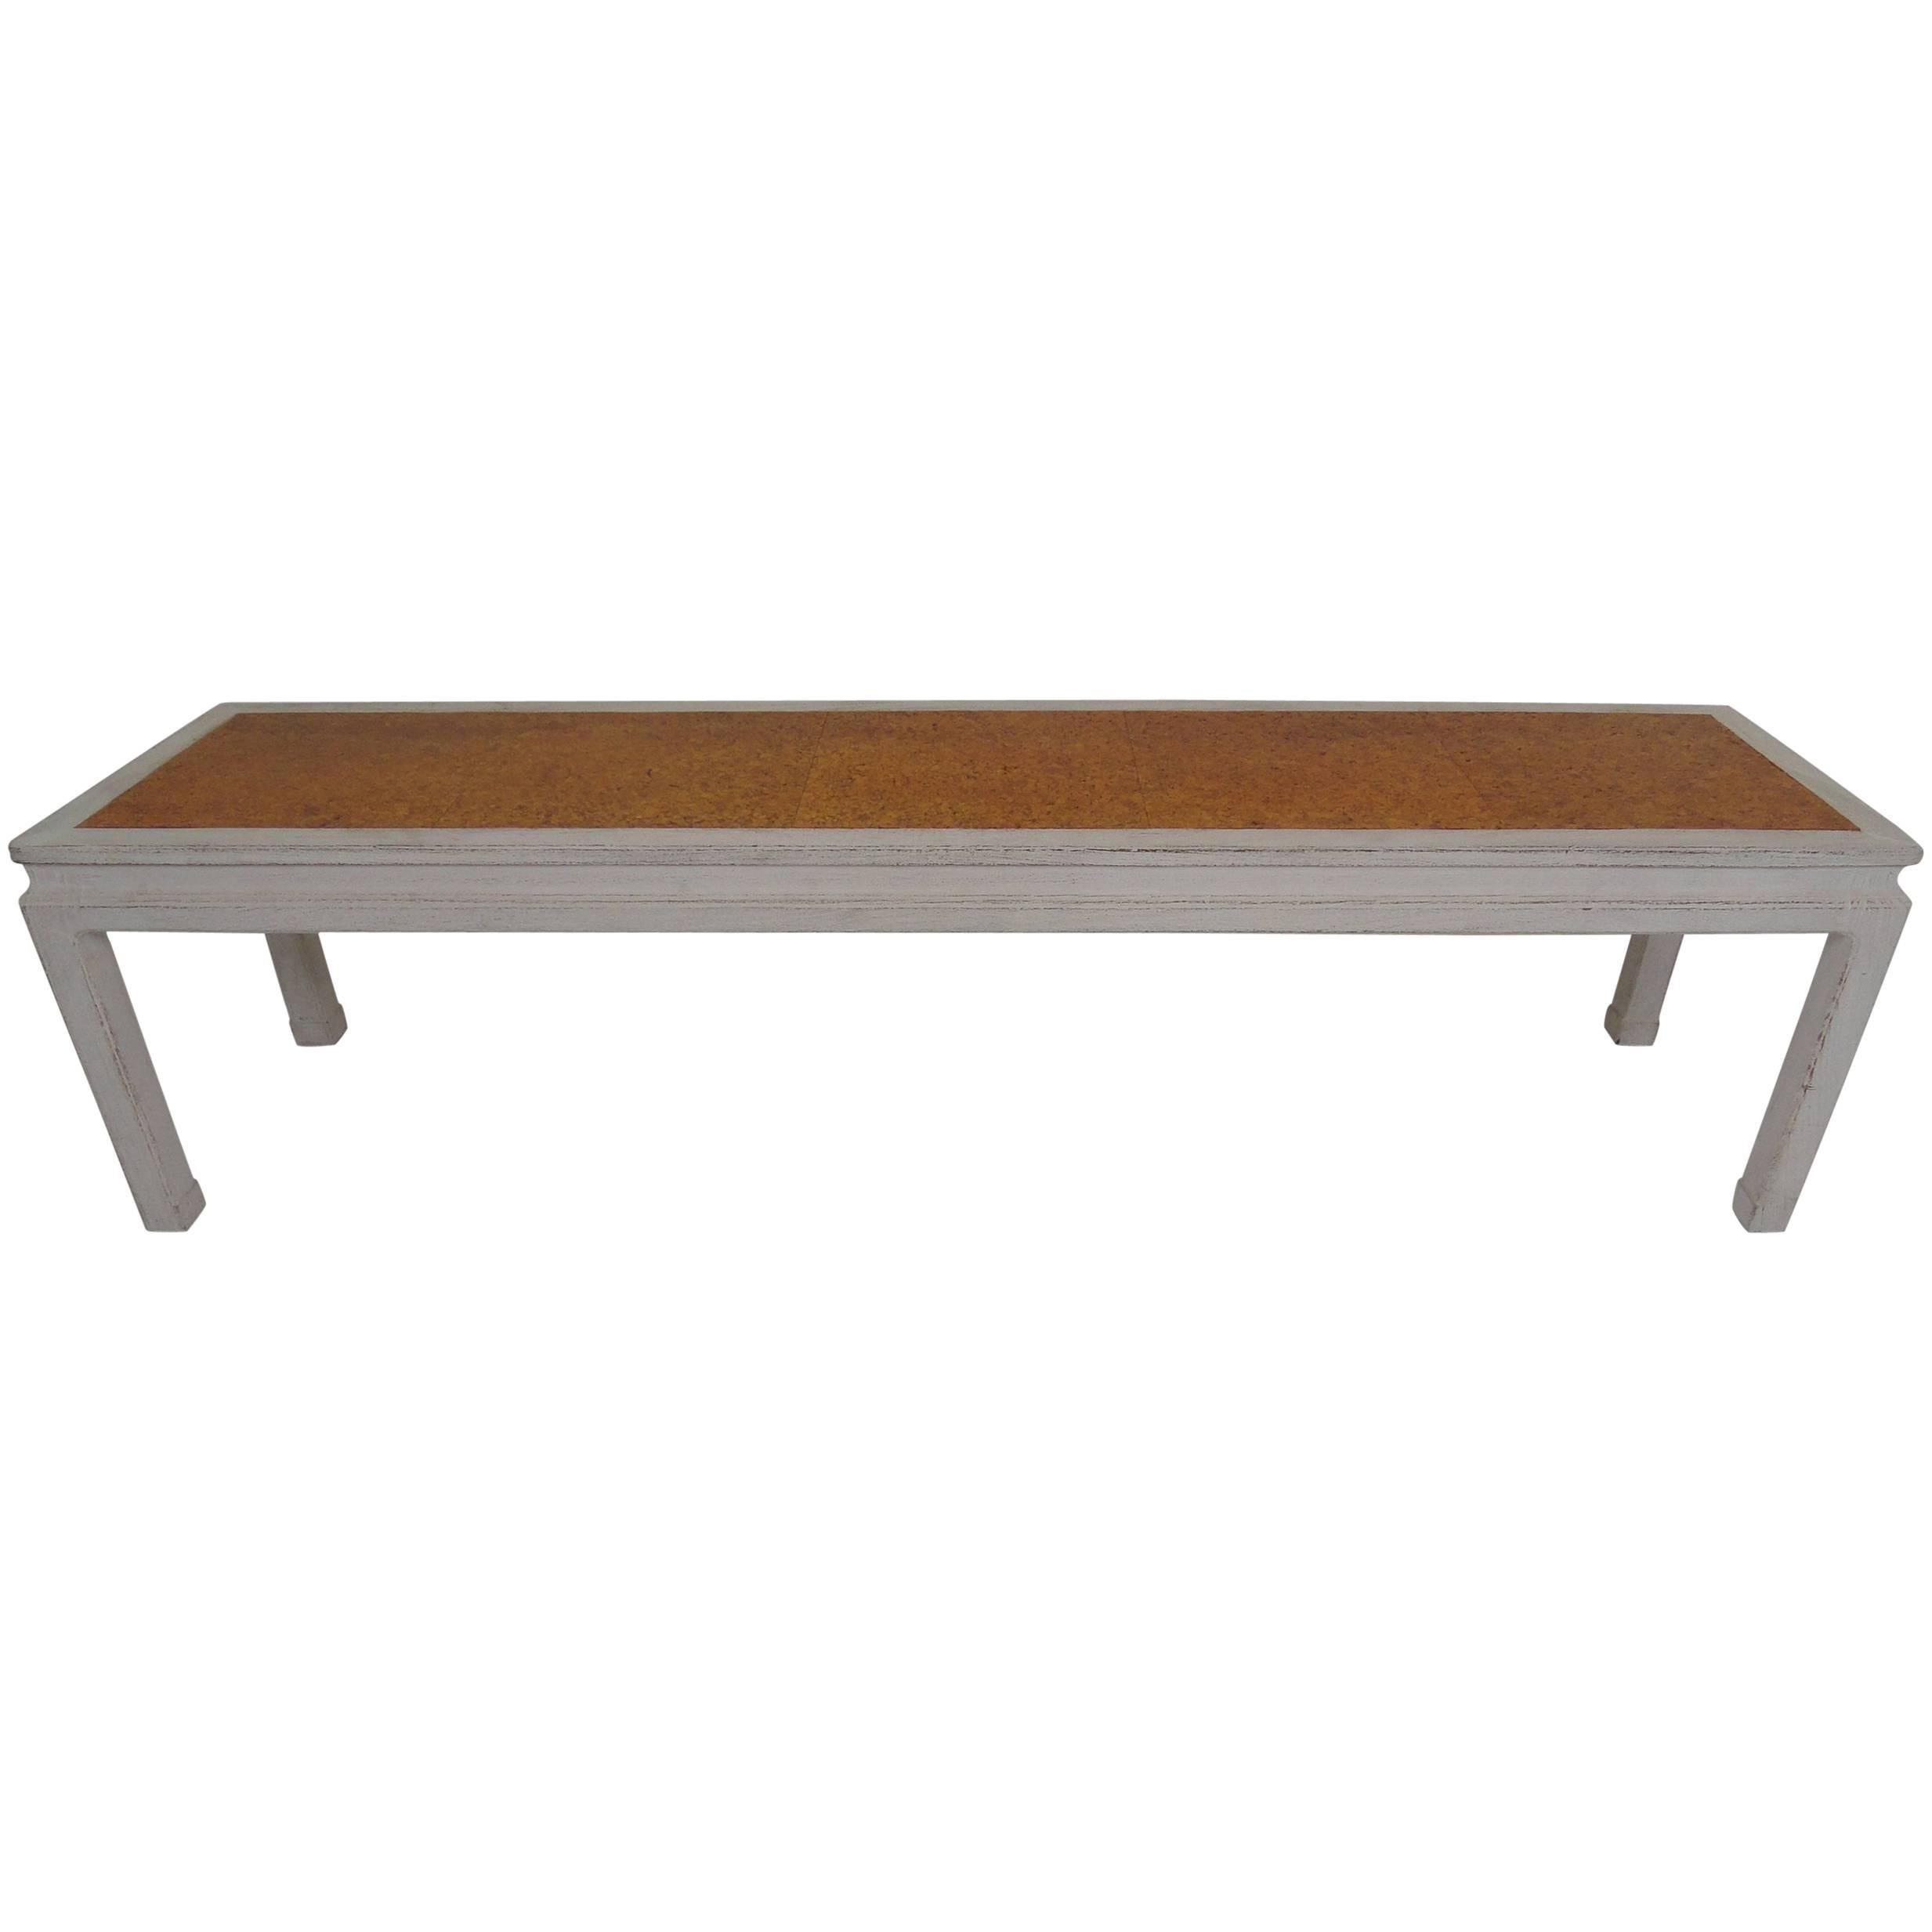 Edward Wormley for Dunbar Coffee Table with Inset Cork Top For Sale